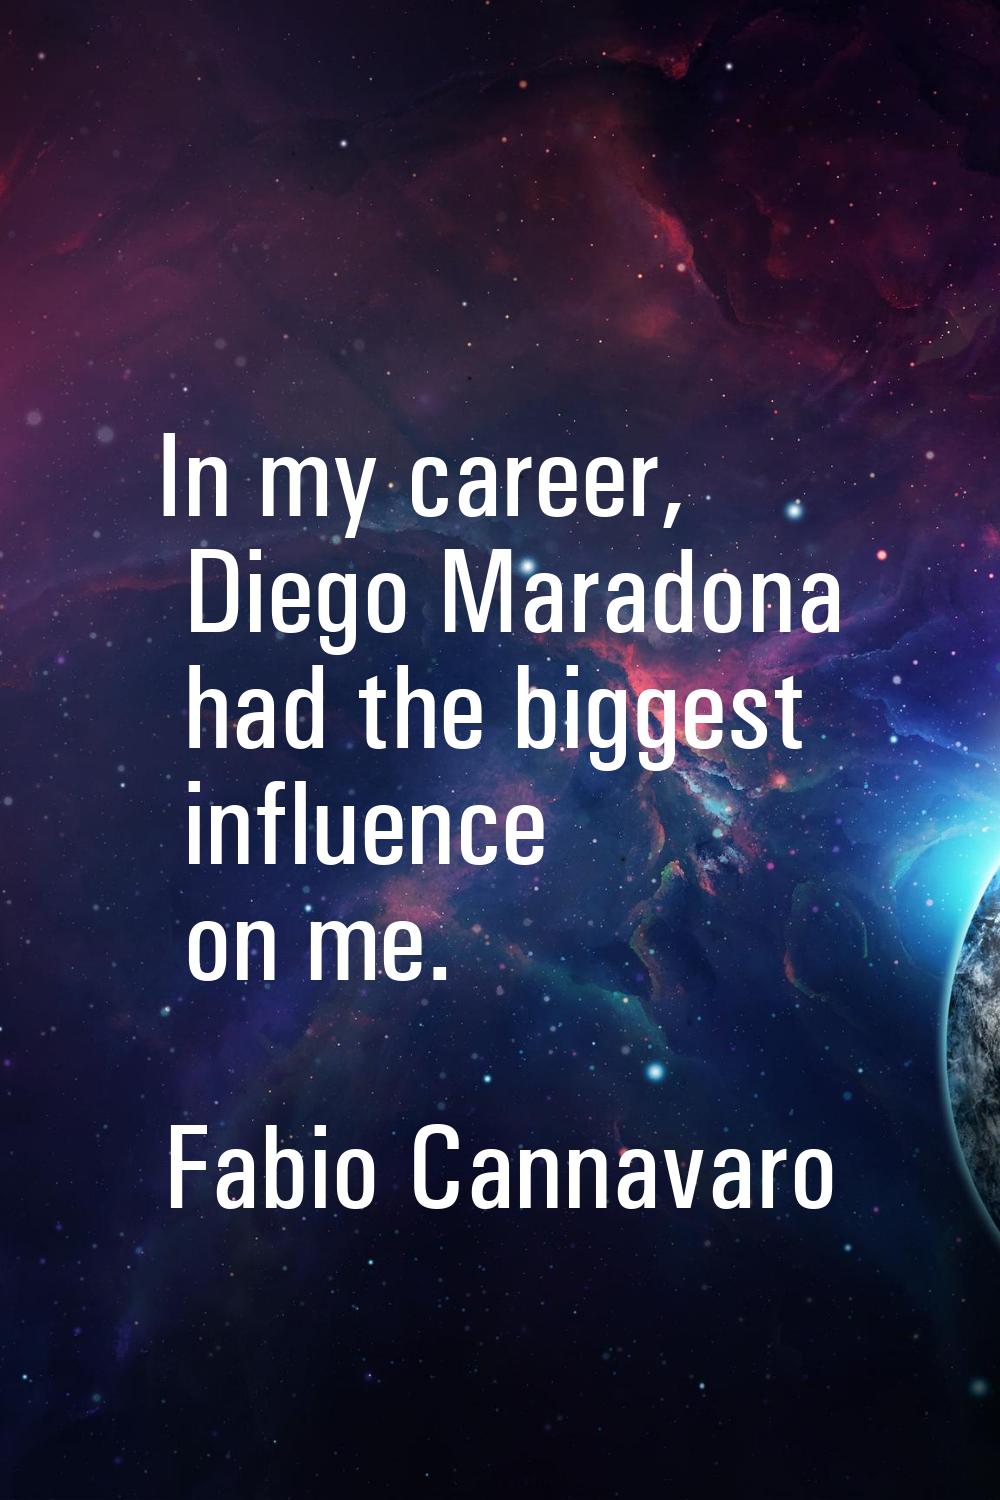 In my career, Diego Maradona had the biggest influence on me.